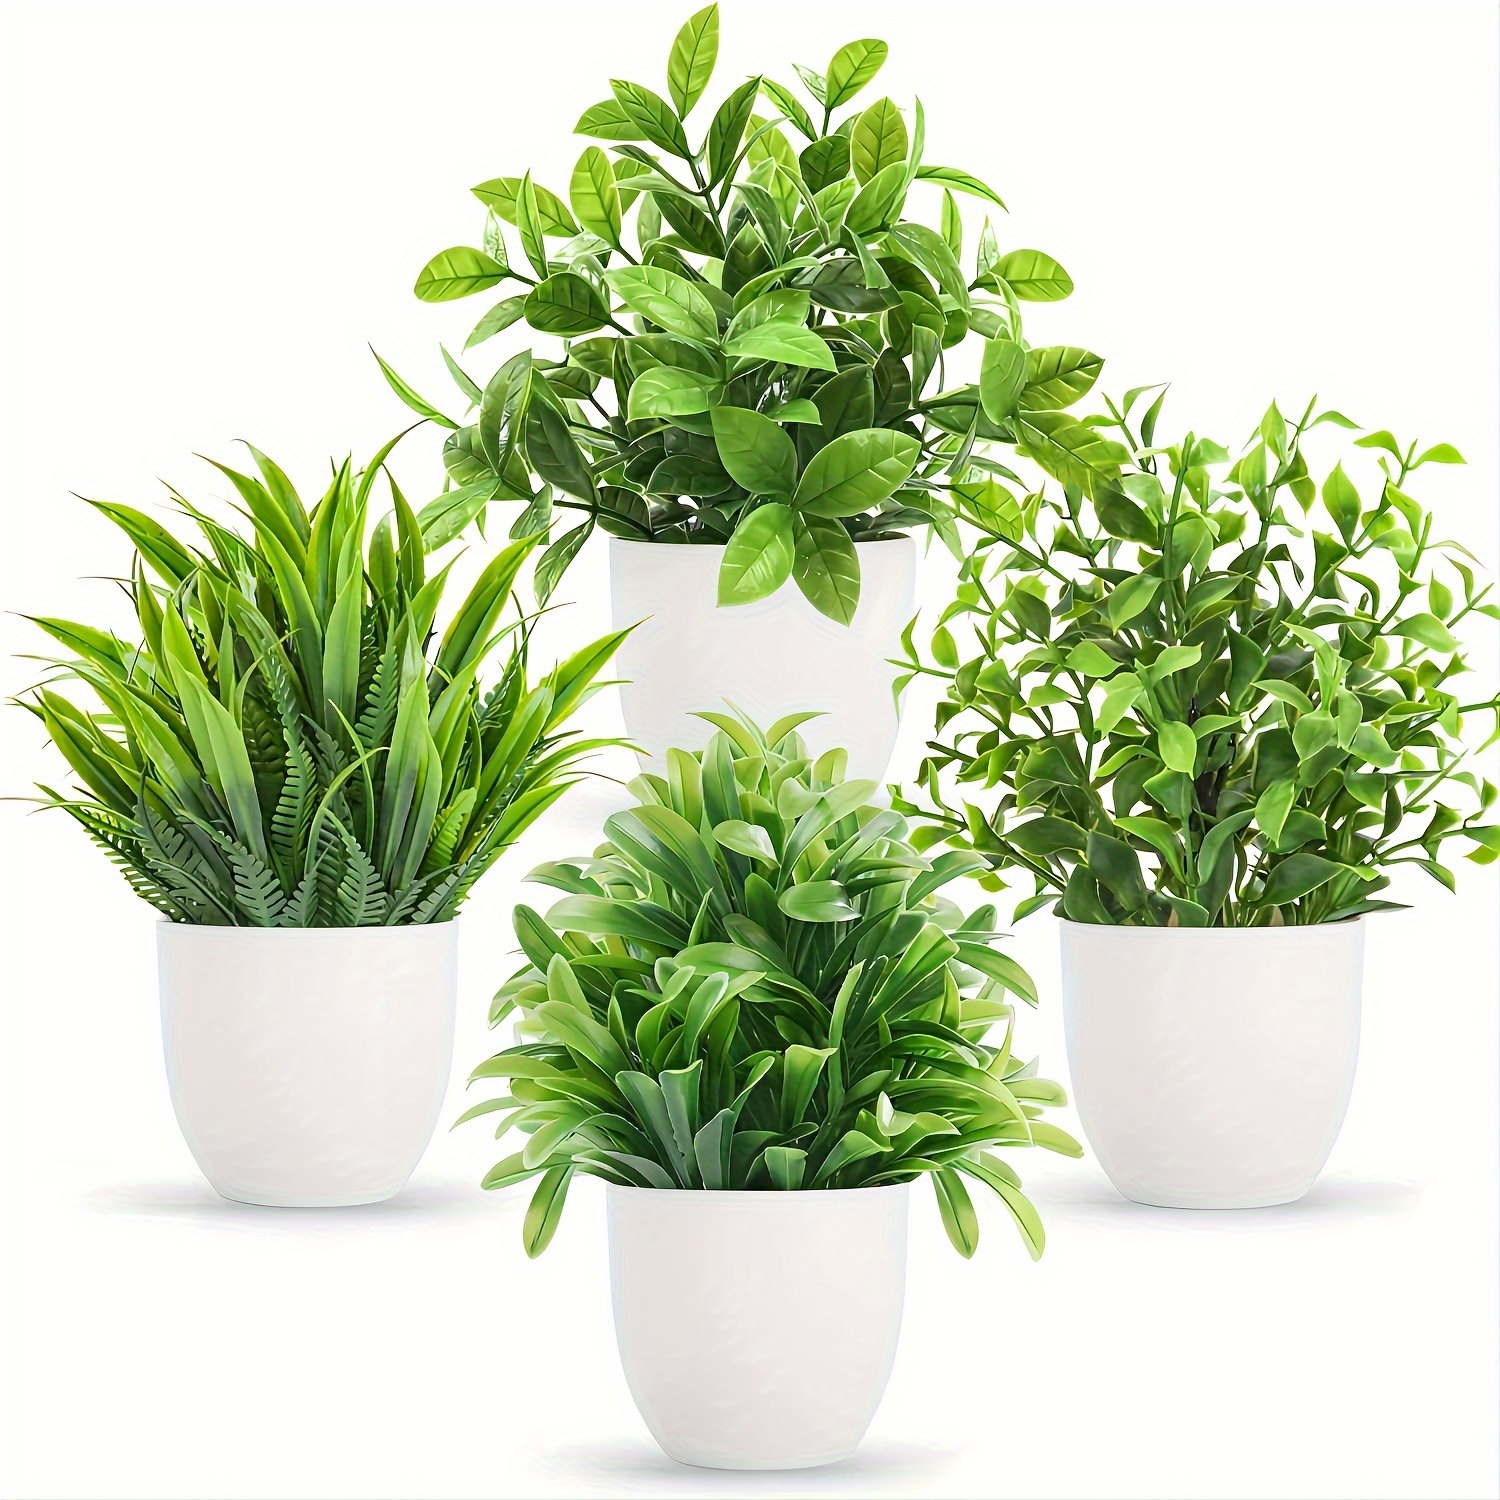 

4 Pack Mini Artificial Potted Plants Fake Bonsai Greenery For Home Office Farmhouse Bathroom Shelf Decor Indoor - Plastic Get Well Occasion